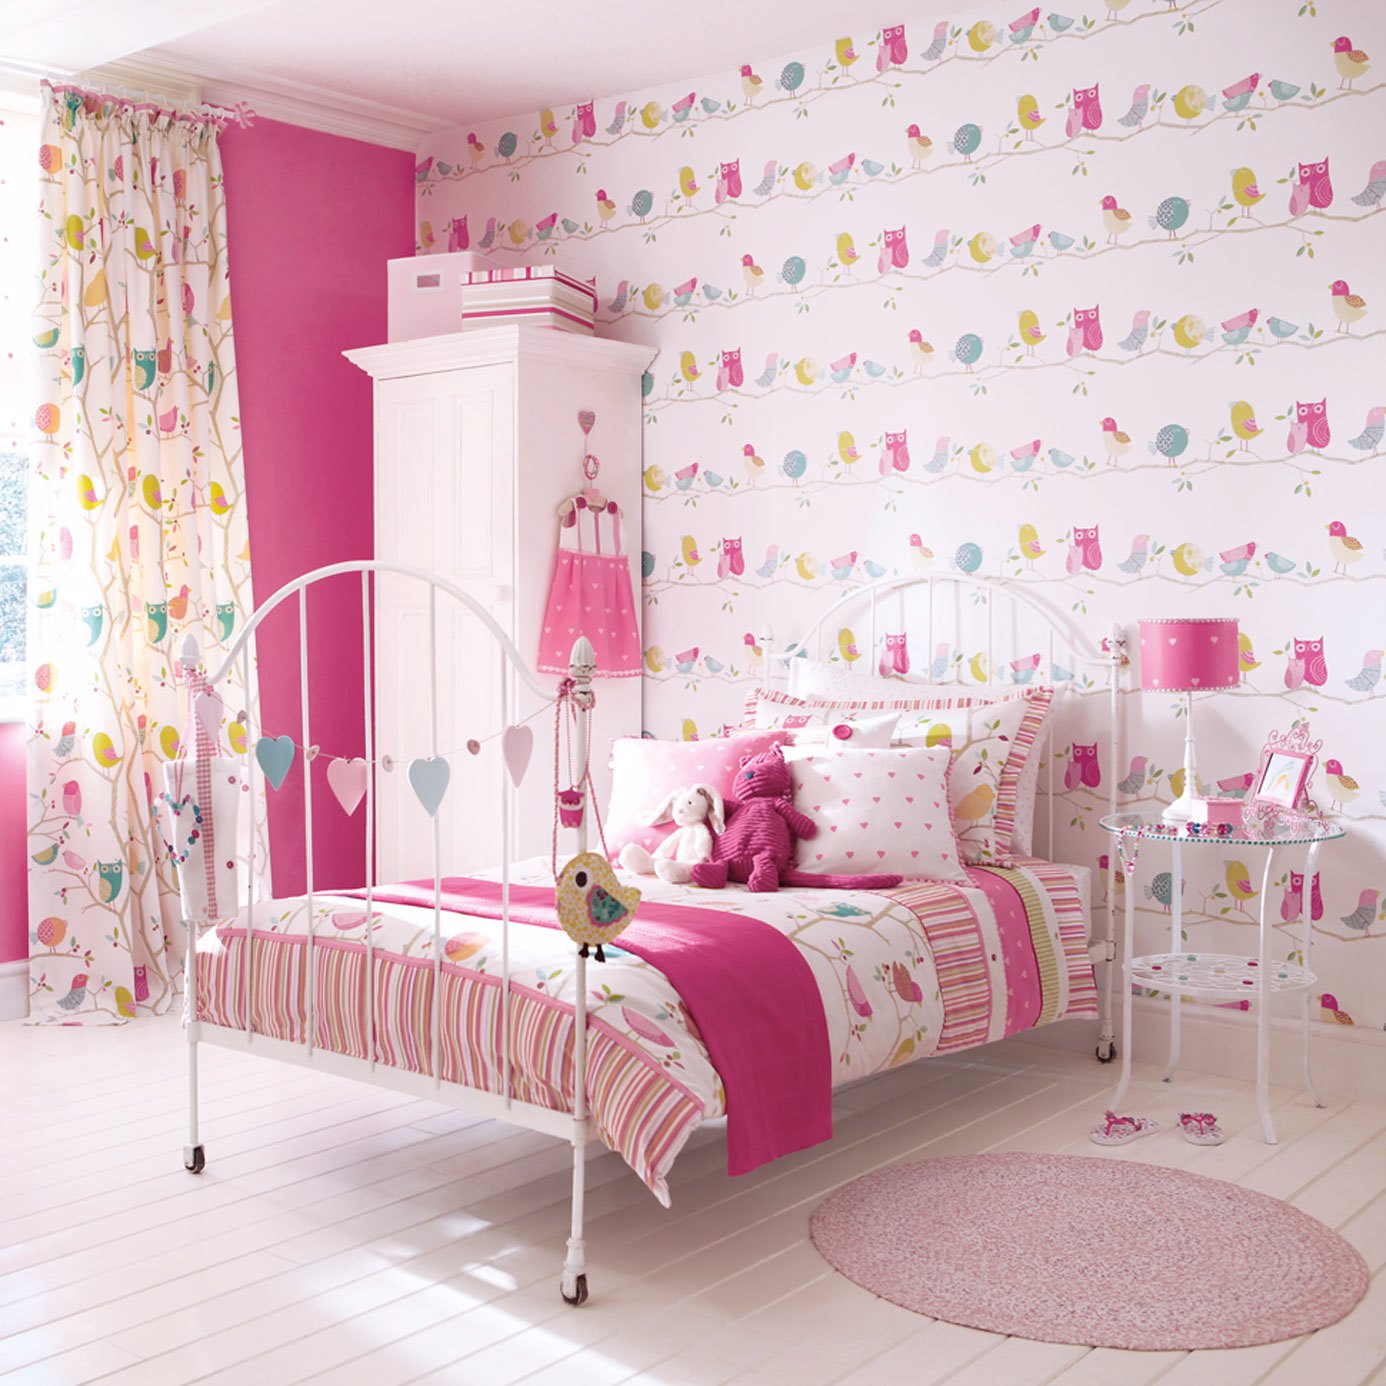 What A Hoot Pink Aqua Apple And Natural Wallpaper by HAR